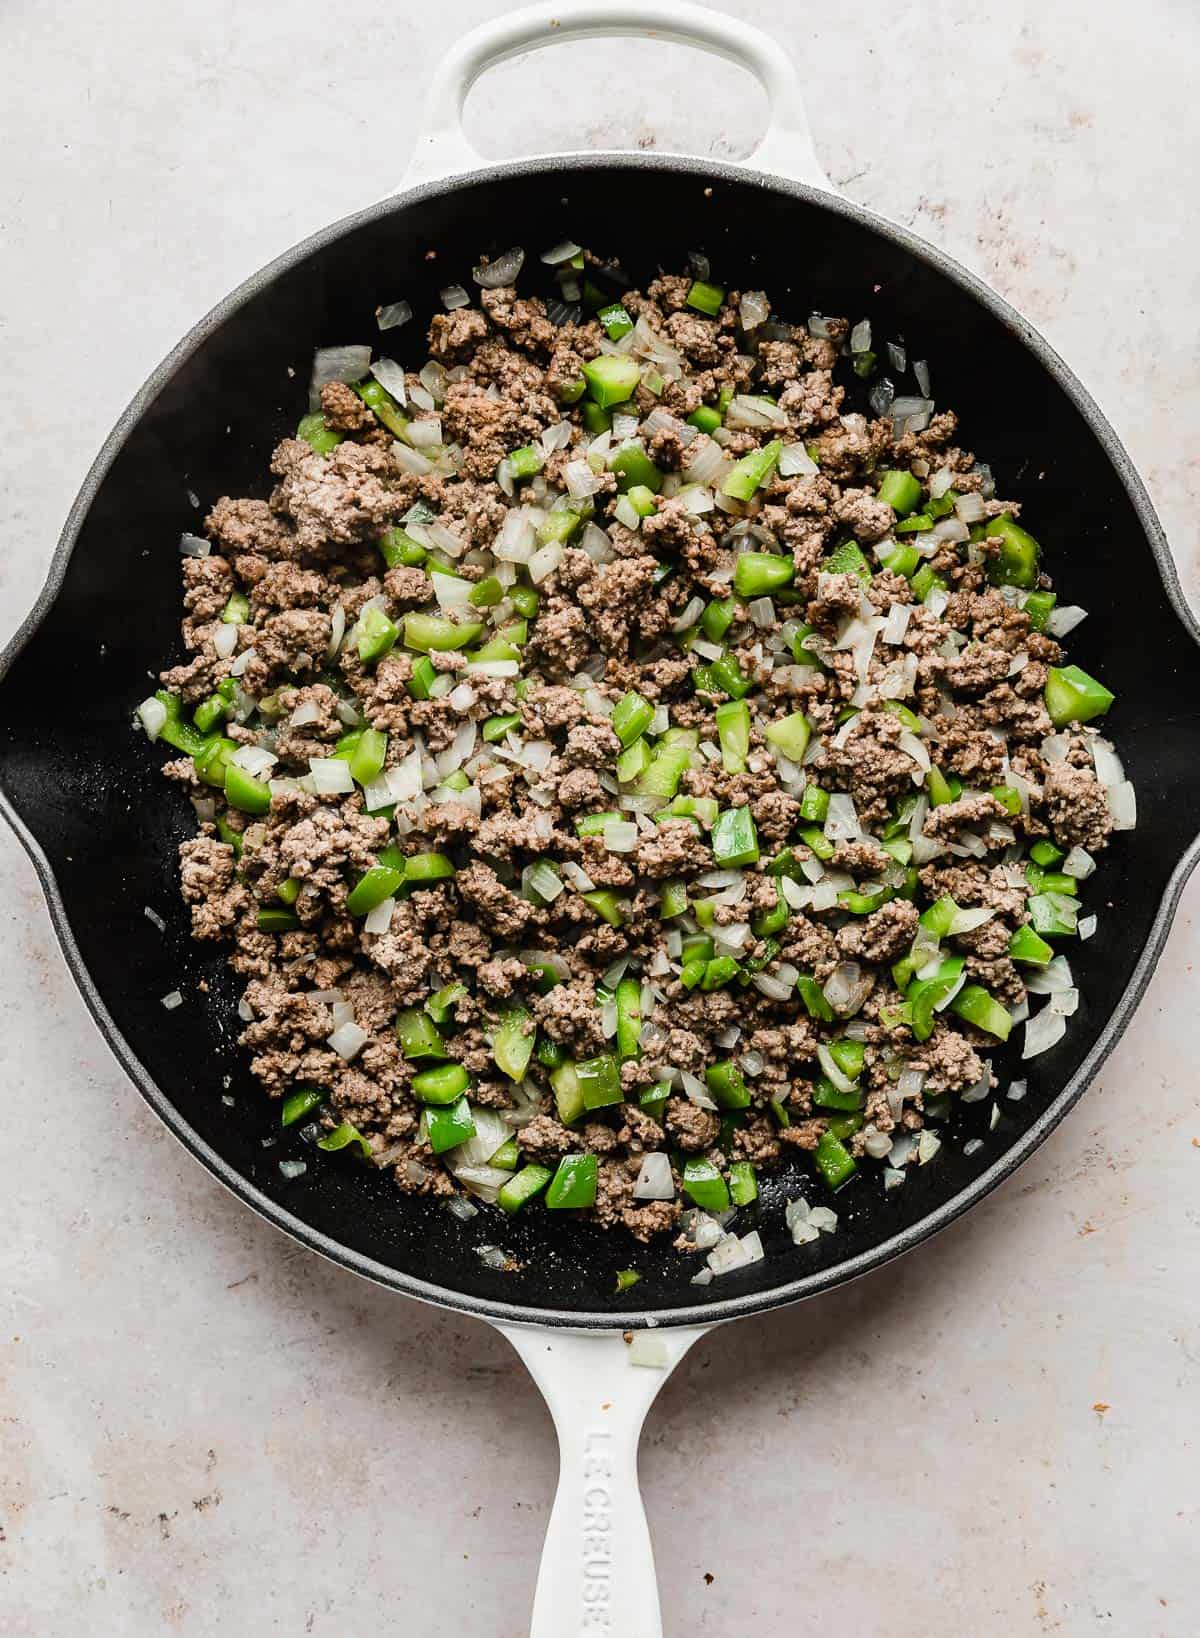 Ground beef mixed with chopped onion and green peppers in a skillet.